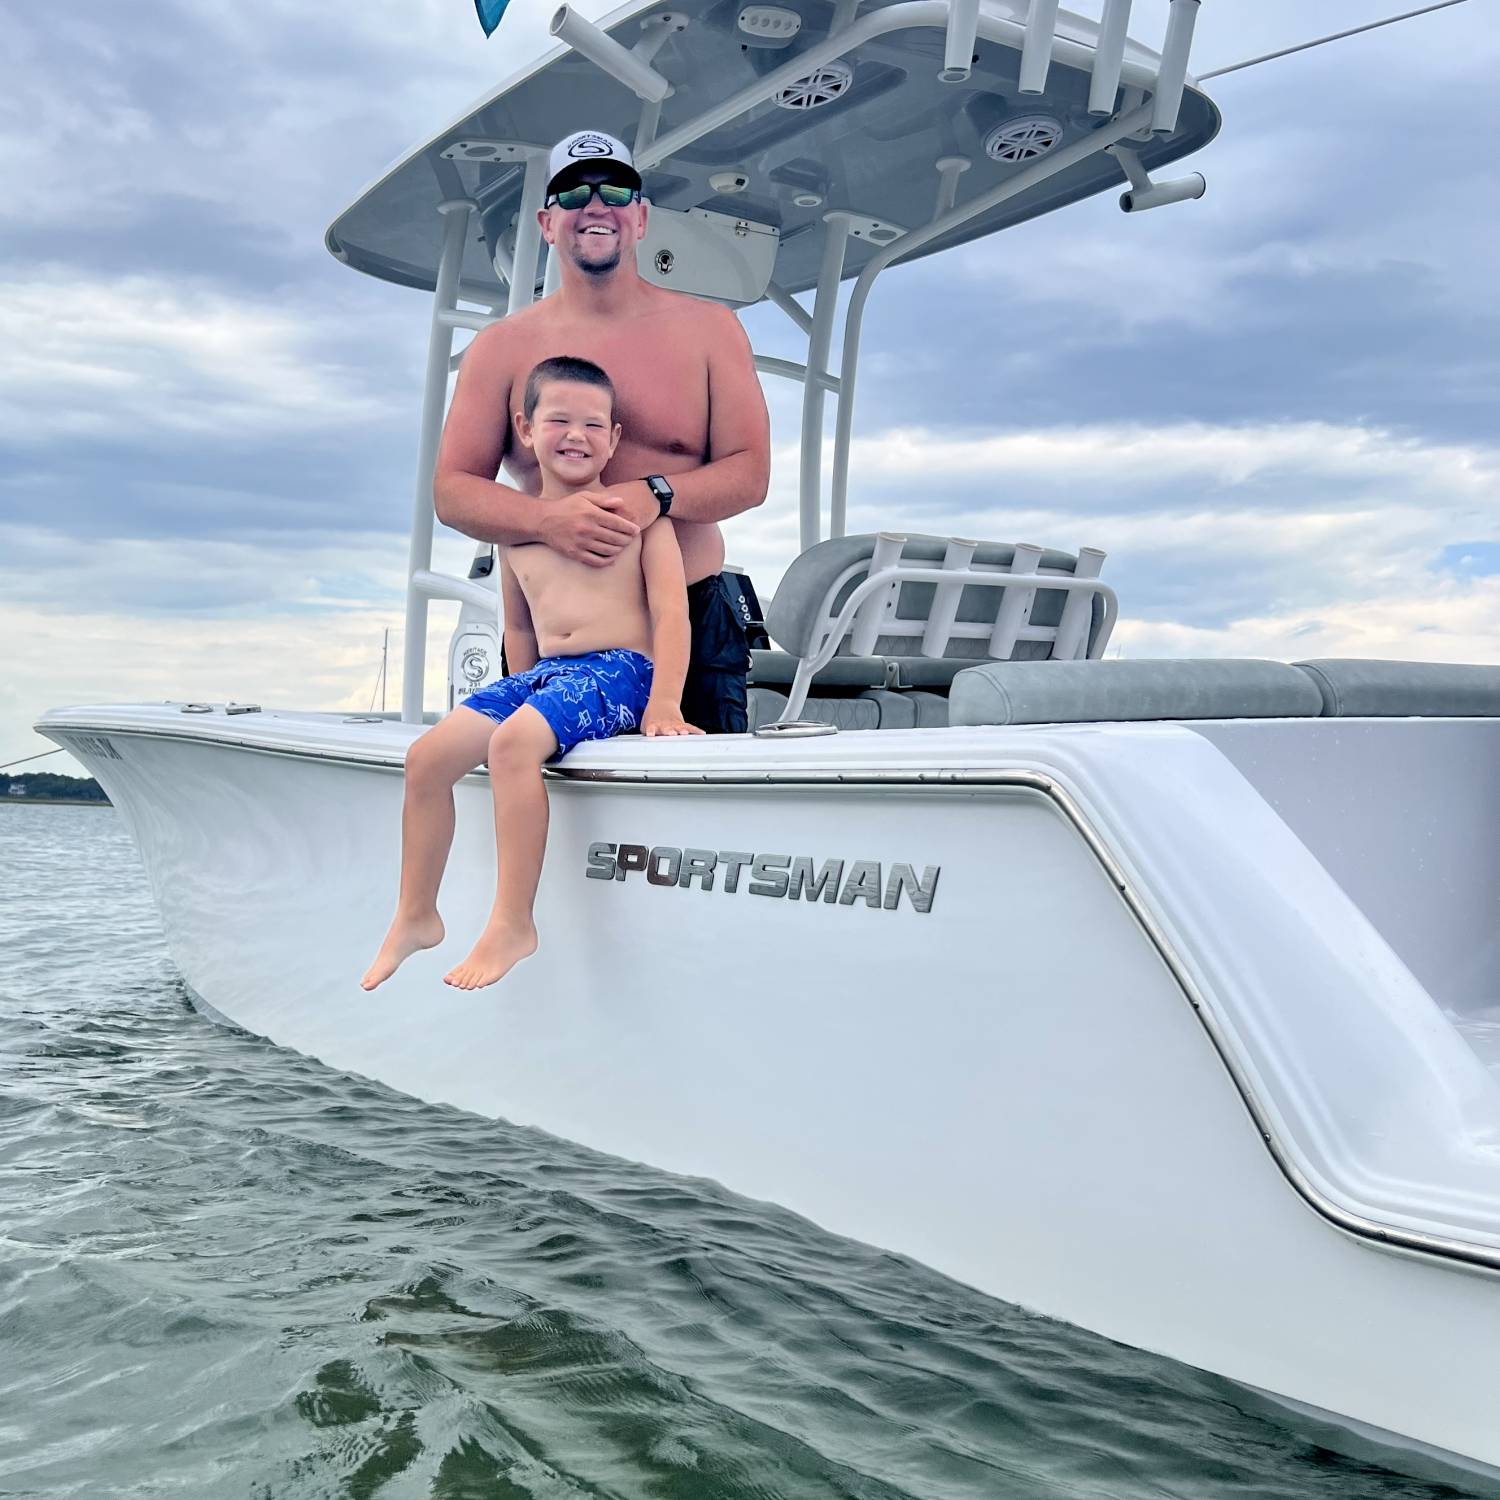 Dad and son (5 years old) enjoying a day at the sandbar catching minnows and crabs and showing off their...